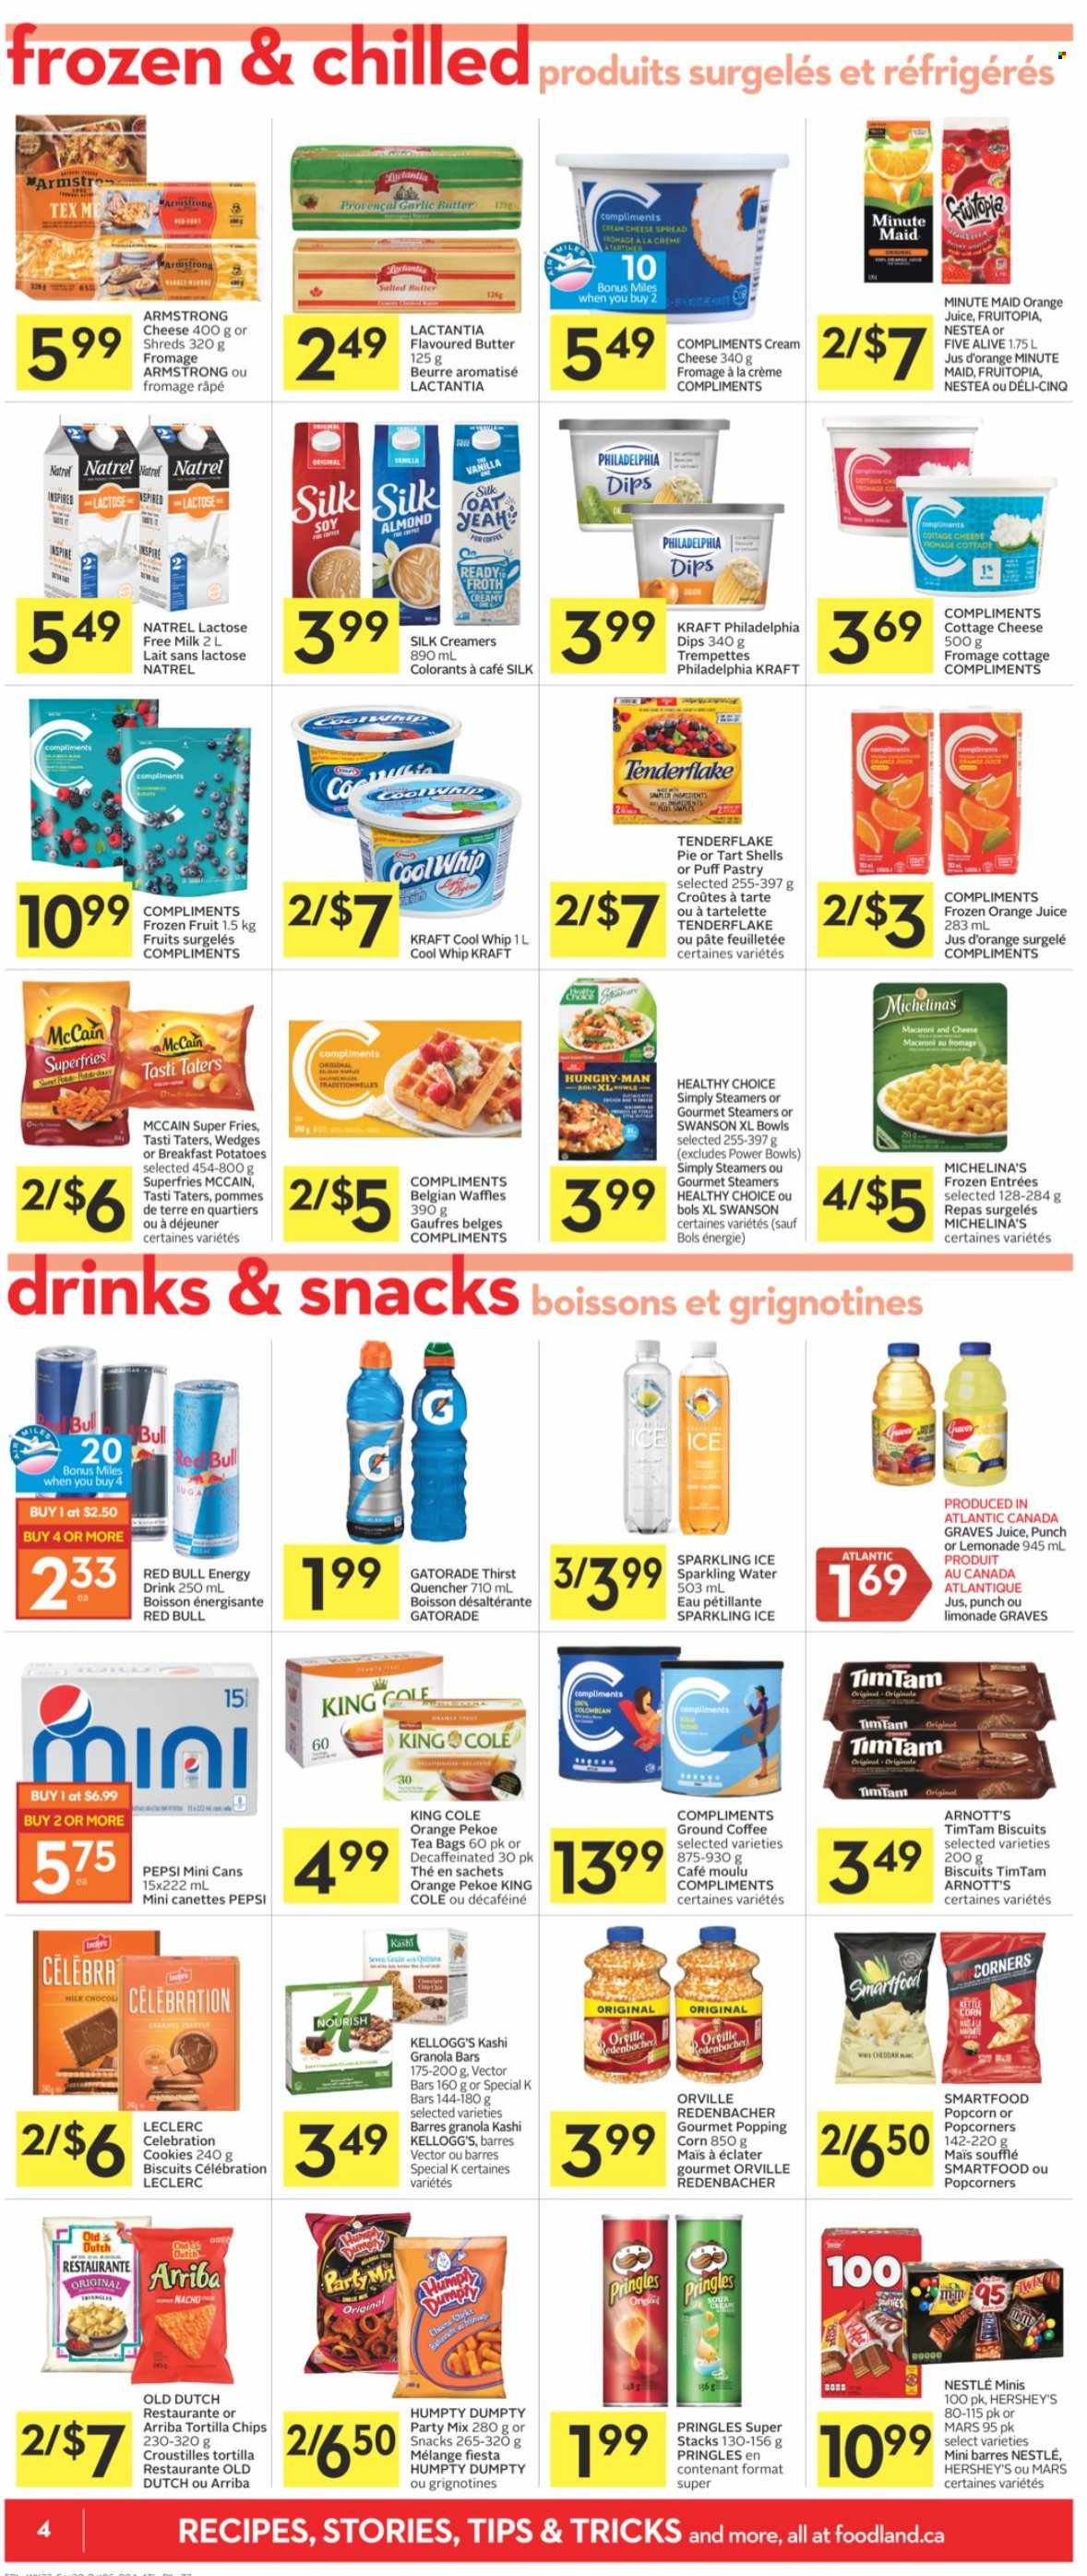 thumbnail - Co-op Flyer - September 30, 2021 - October 06, 2021 - Sales products - pie, waffles, corn, potatoes, macaroni, Healthy Choice, Kraft®, cheese spread, cottage cheese, cream cheese, milk, lactose free milk, Silk, butter, Cool Whip, puff pastry, Hershey's, McCain, potato fries, cookies, Mars, Celebration, Kellogg's, biscuit, tortilla chips, Pringles, Smartfood, popcorn, oats, granola bar, lemonade, Pepsi, orange juice, juice, energy drink, Red Bull, Gatorade, fruit punch, sparkling water, tea bags, coffee, ground coffee, Nestlé, Philadelphia. Page 4.